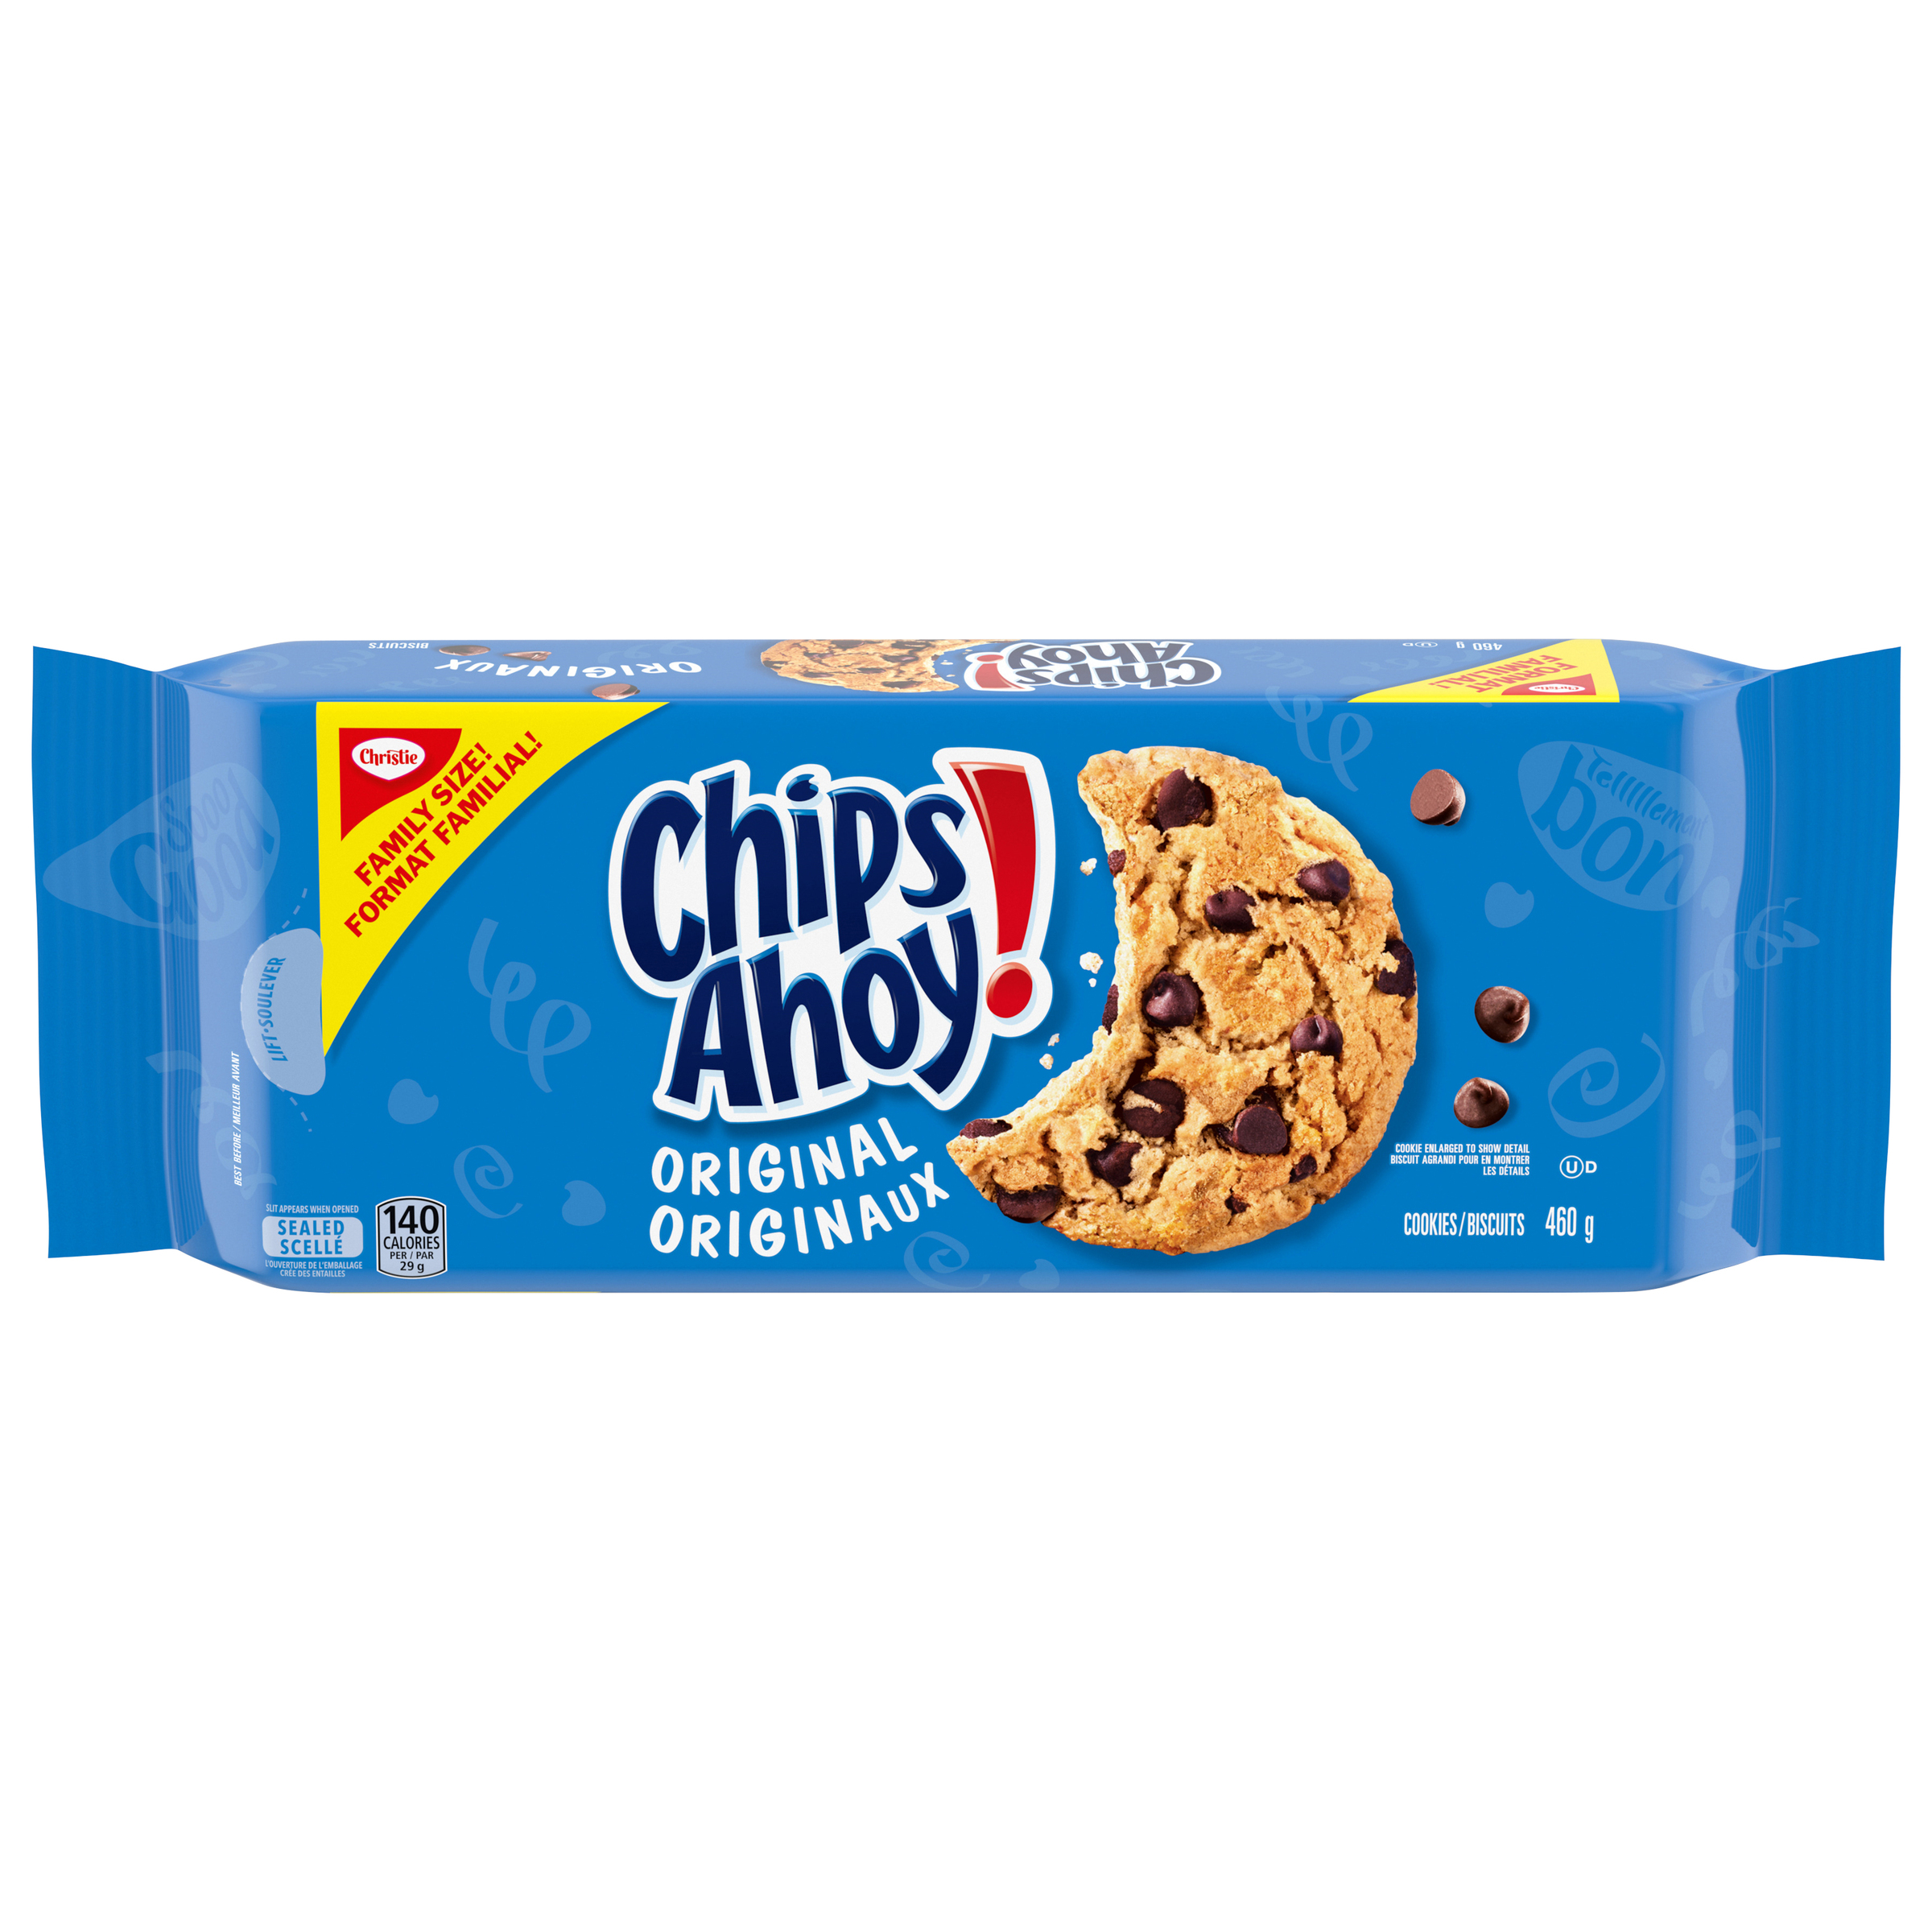 CHIPS AHOY! Original Chocolate Chip Cookies, 1 Family Size Resealable Pack, 460 g